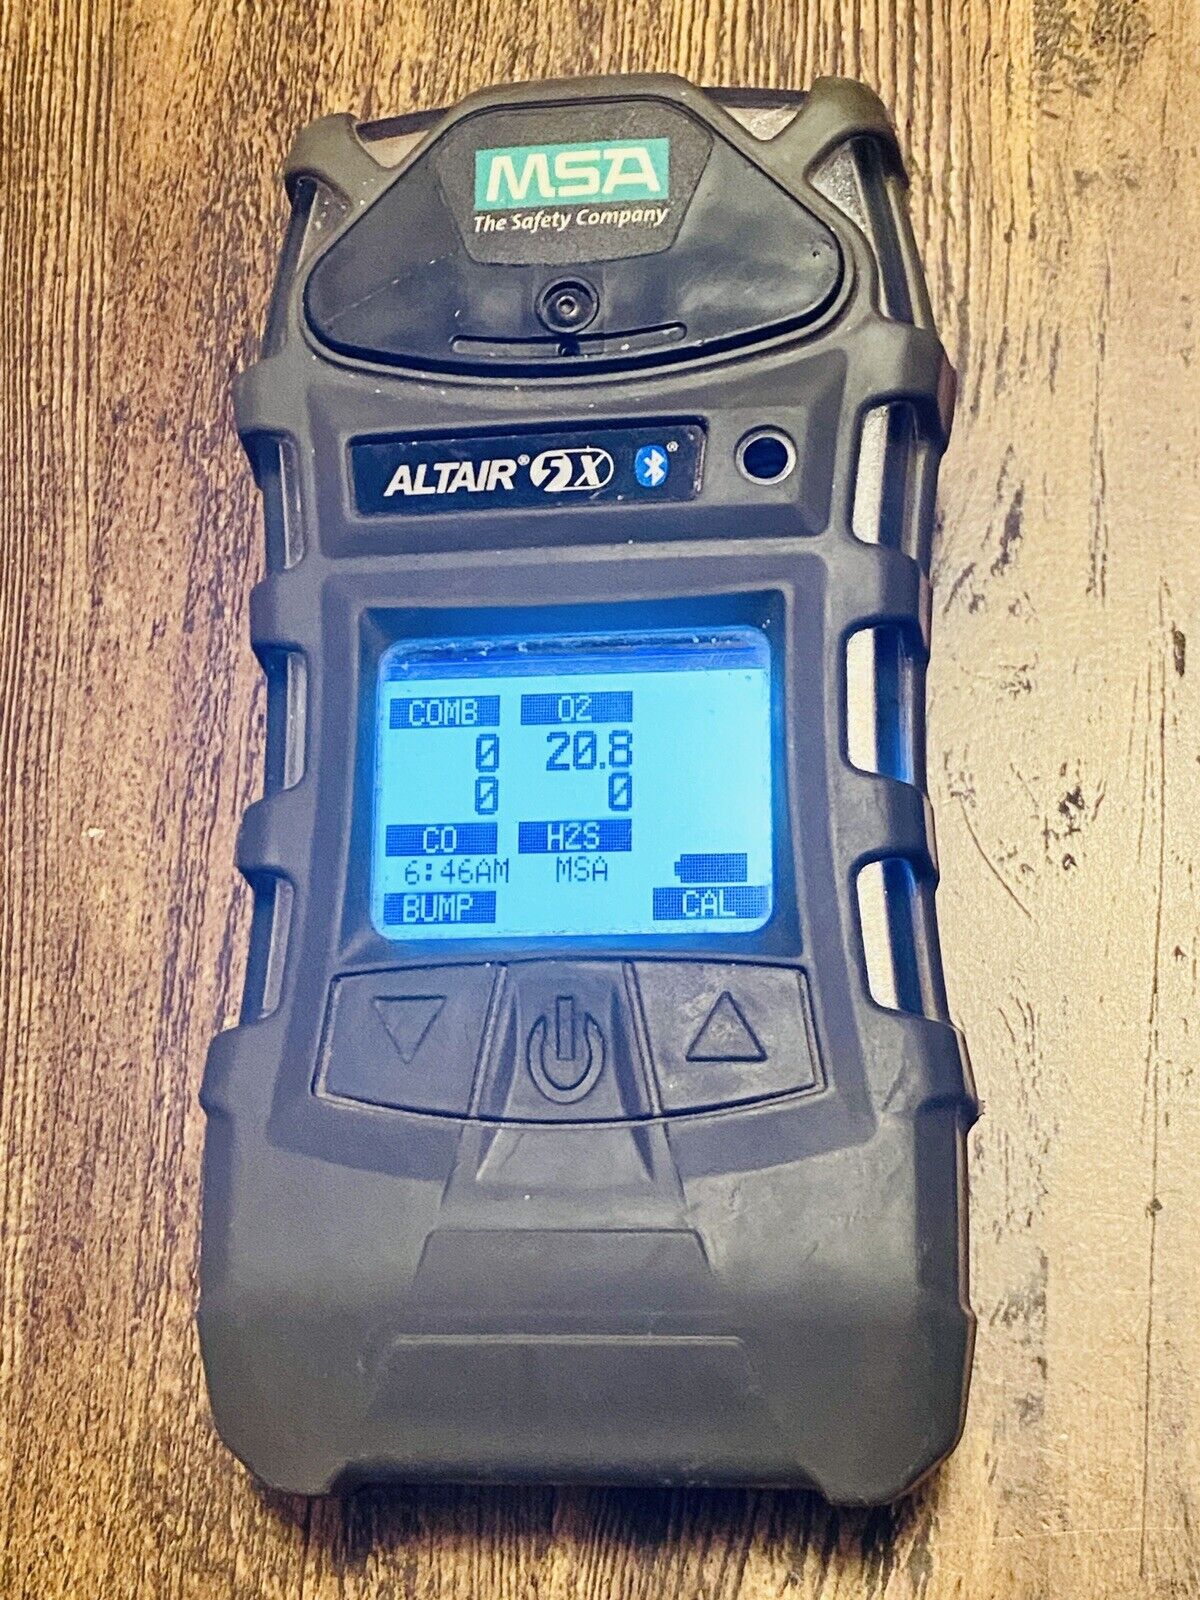 MSA Altair 5X Bluetooth Gas Detector Industrial Kit - LEL, O2, CO, H2S